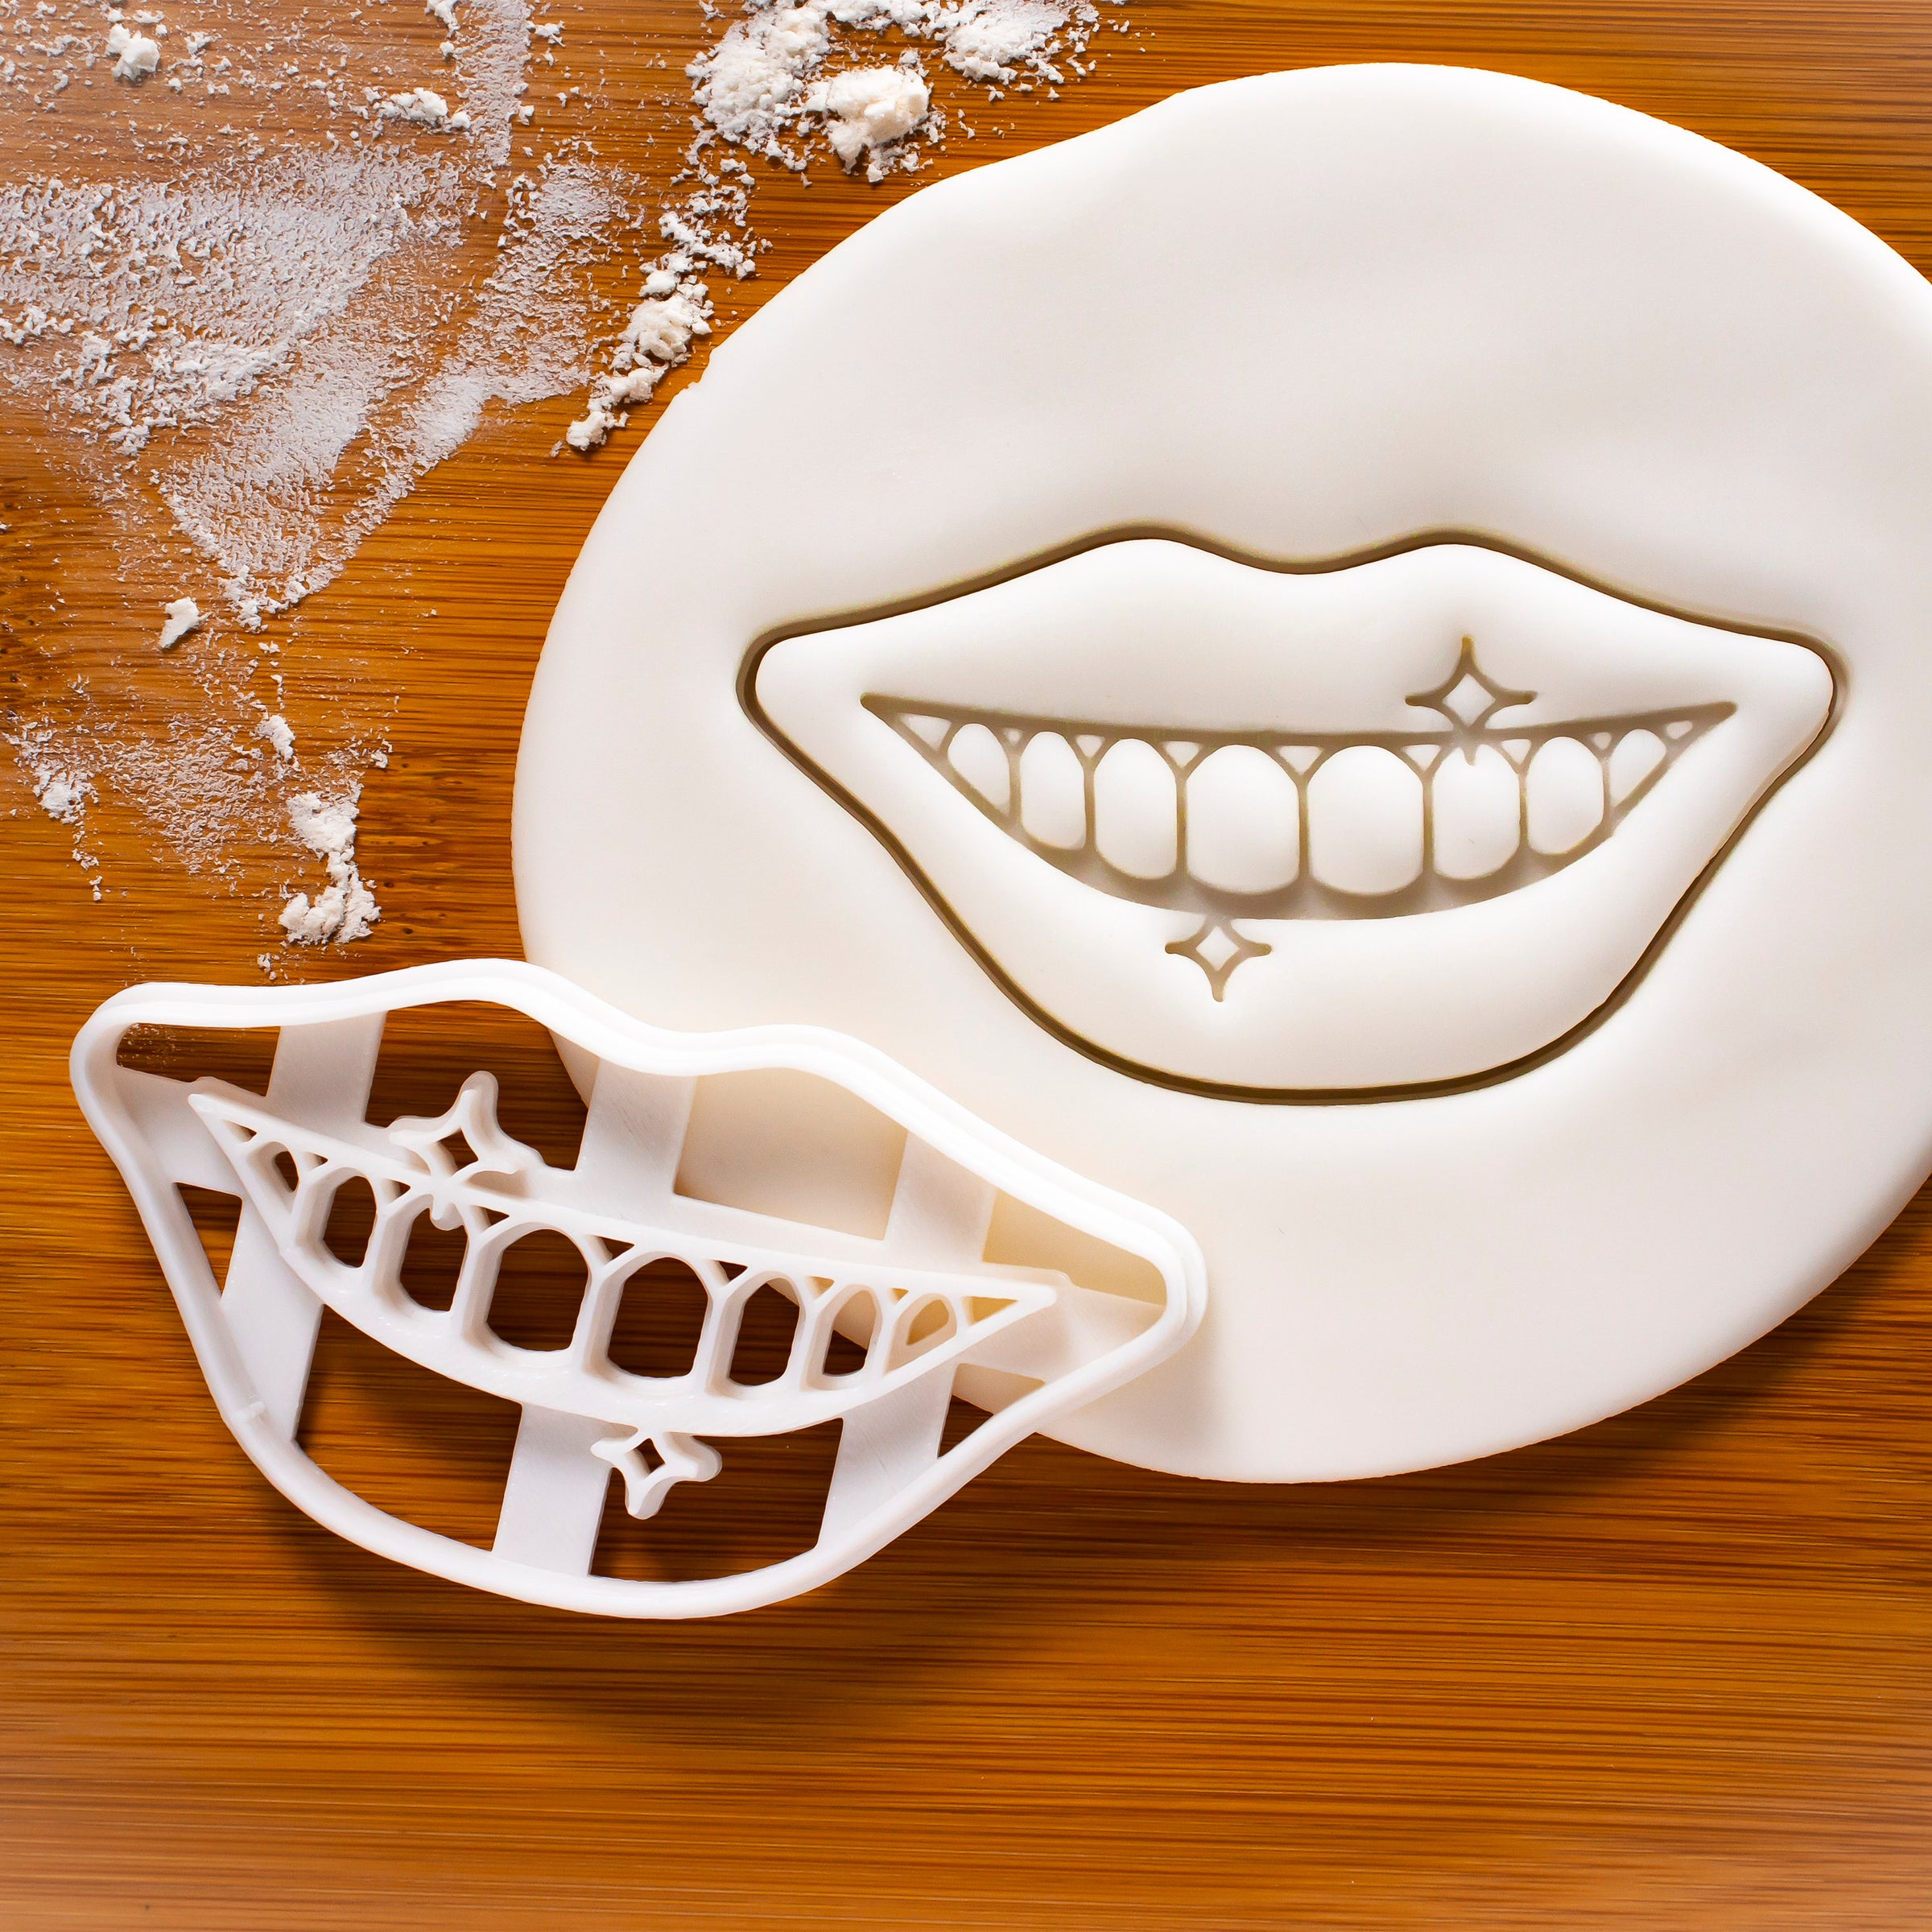 shiny teeth cookie cutter